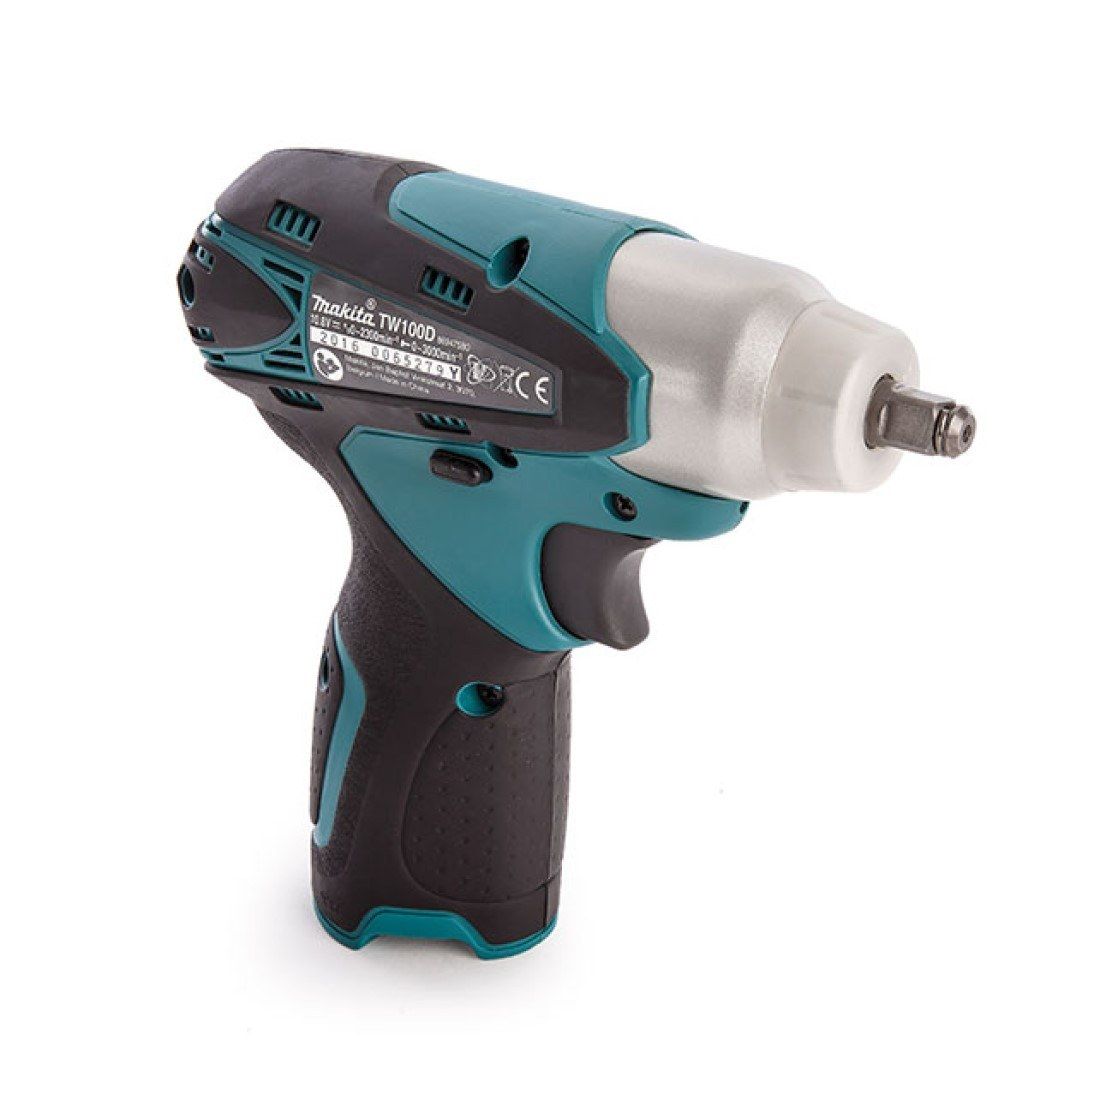 Makita TW100DZ 10.8 Volt Push In Li-Ion Cordless 3/8" Impact Wrench Body Only 